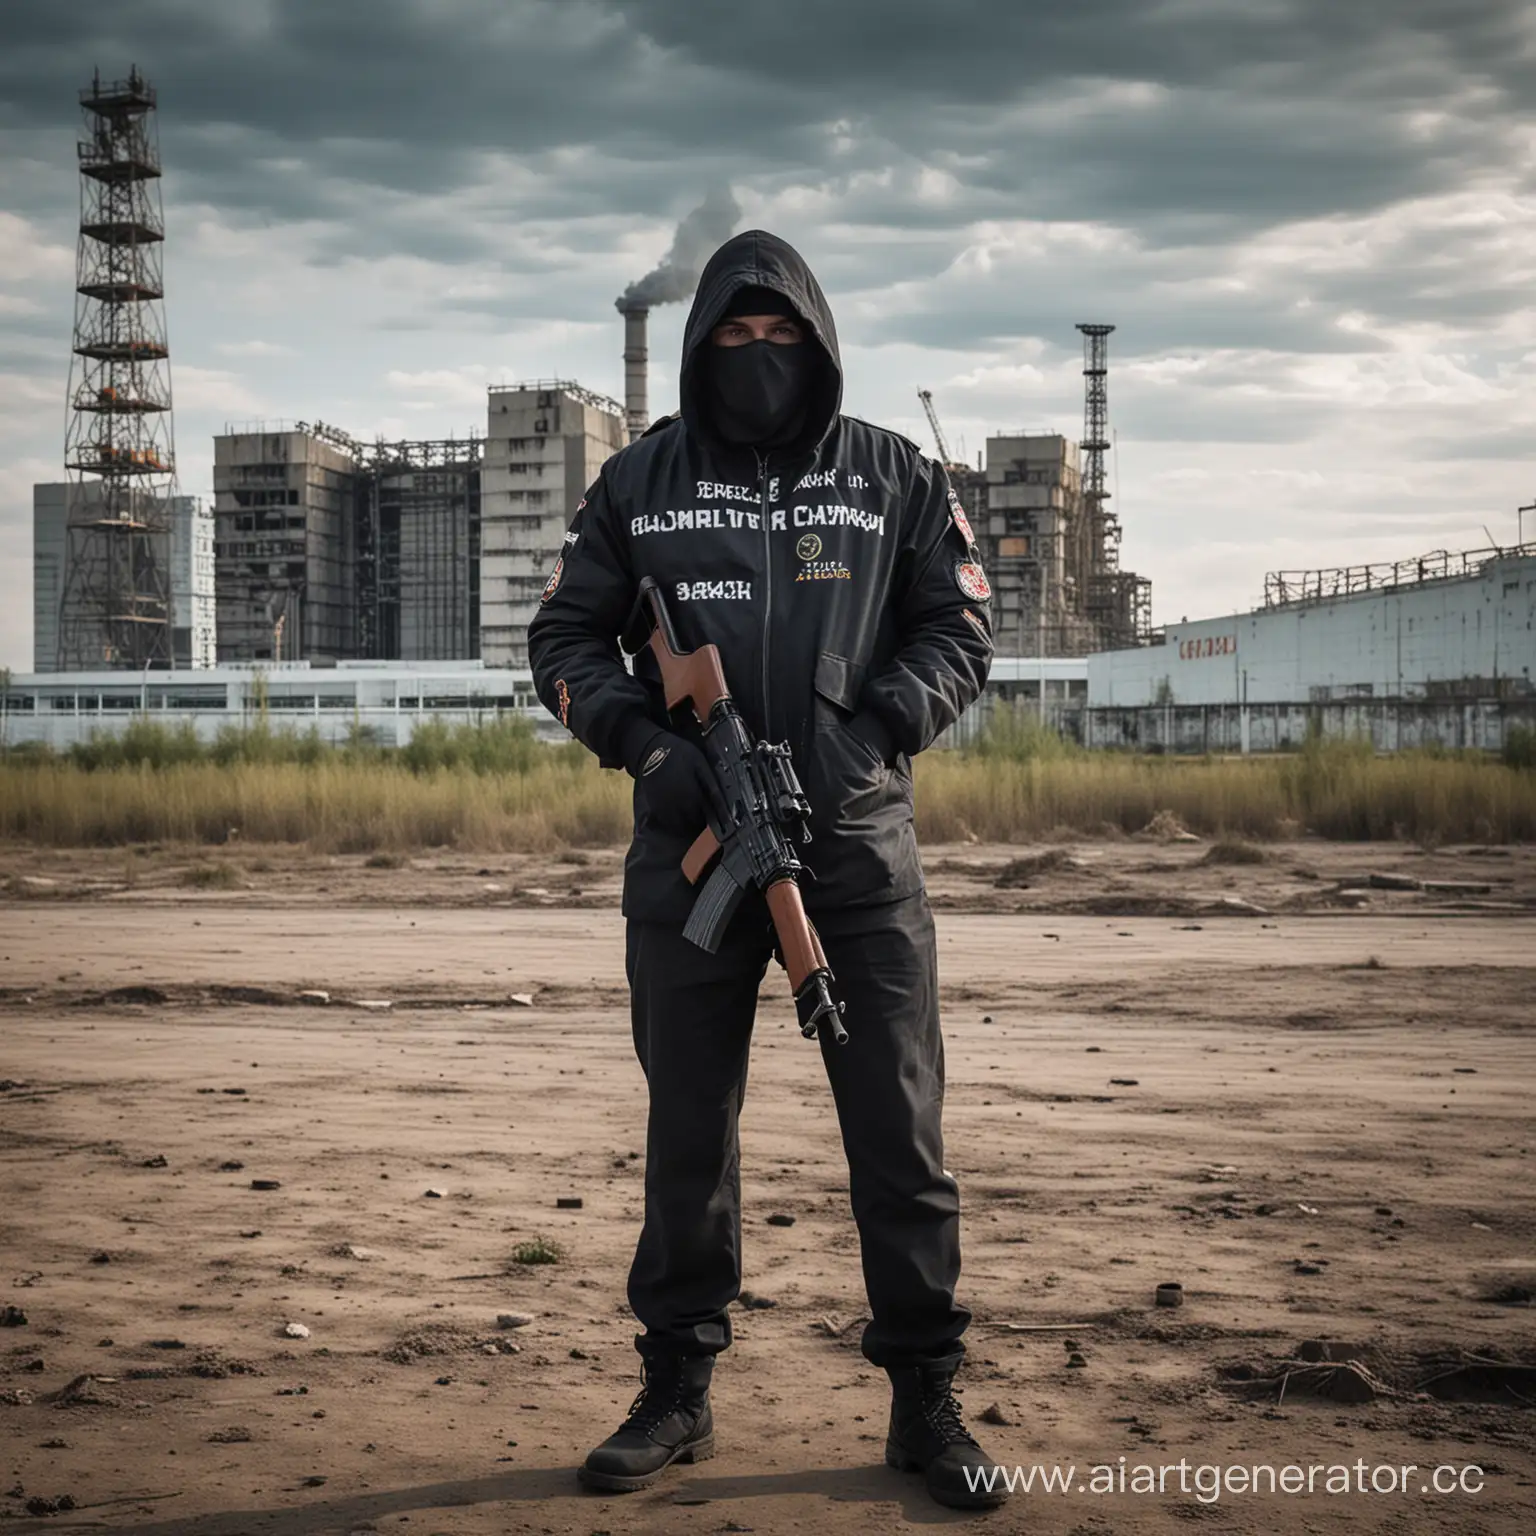 Stalker-with-AK47-at-Chernobyl-Nuclear-Power-Plant